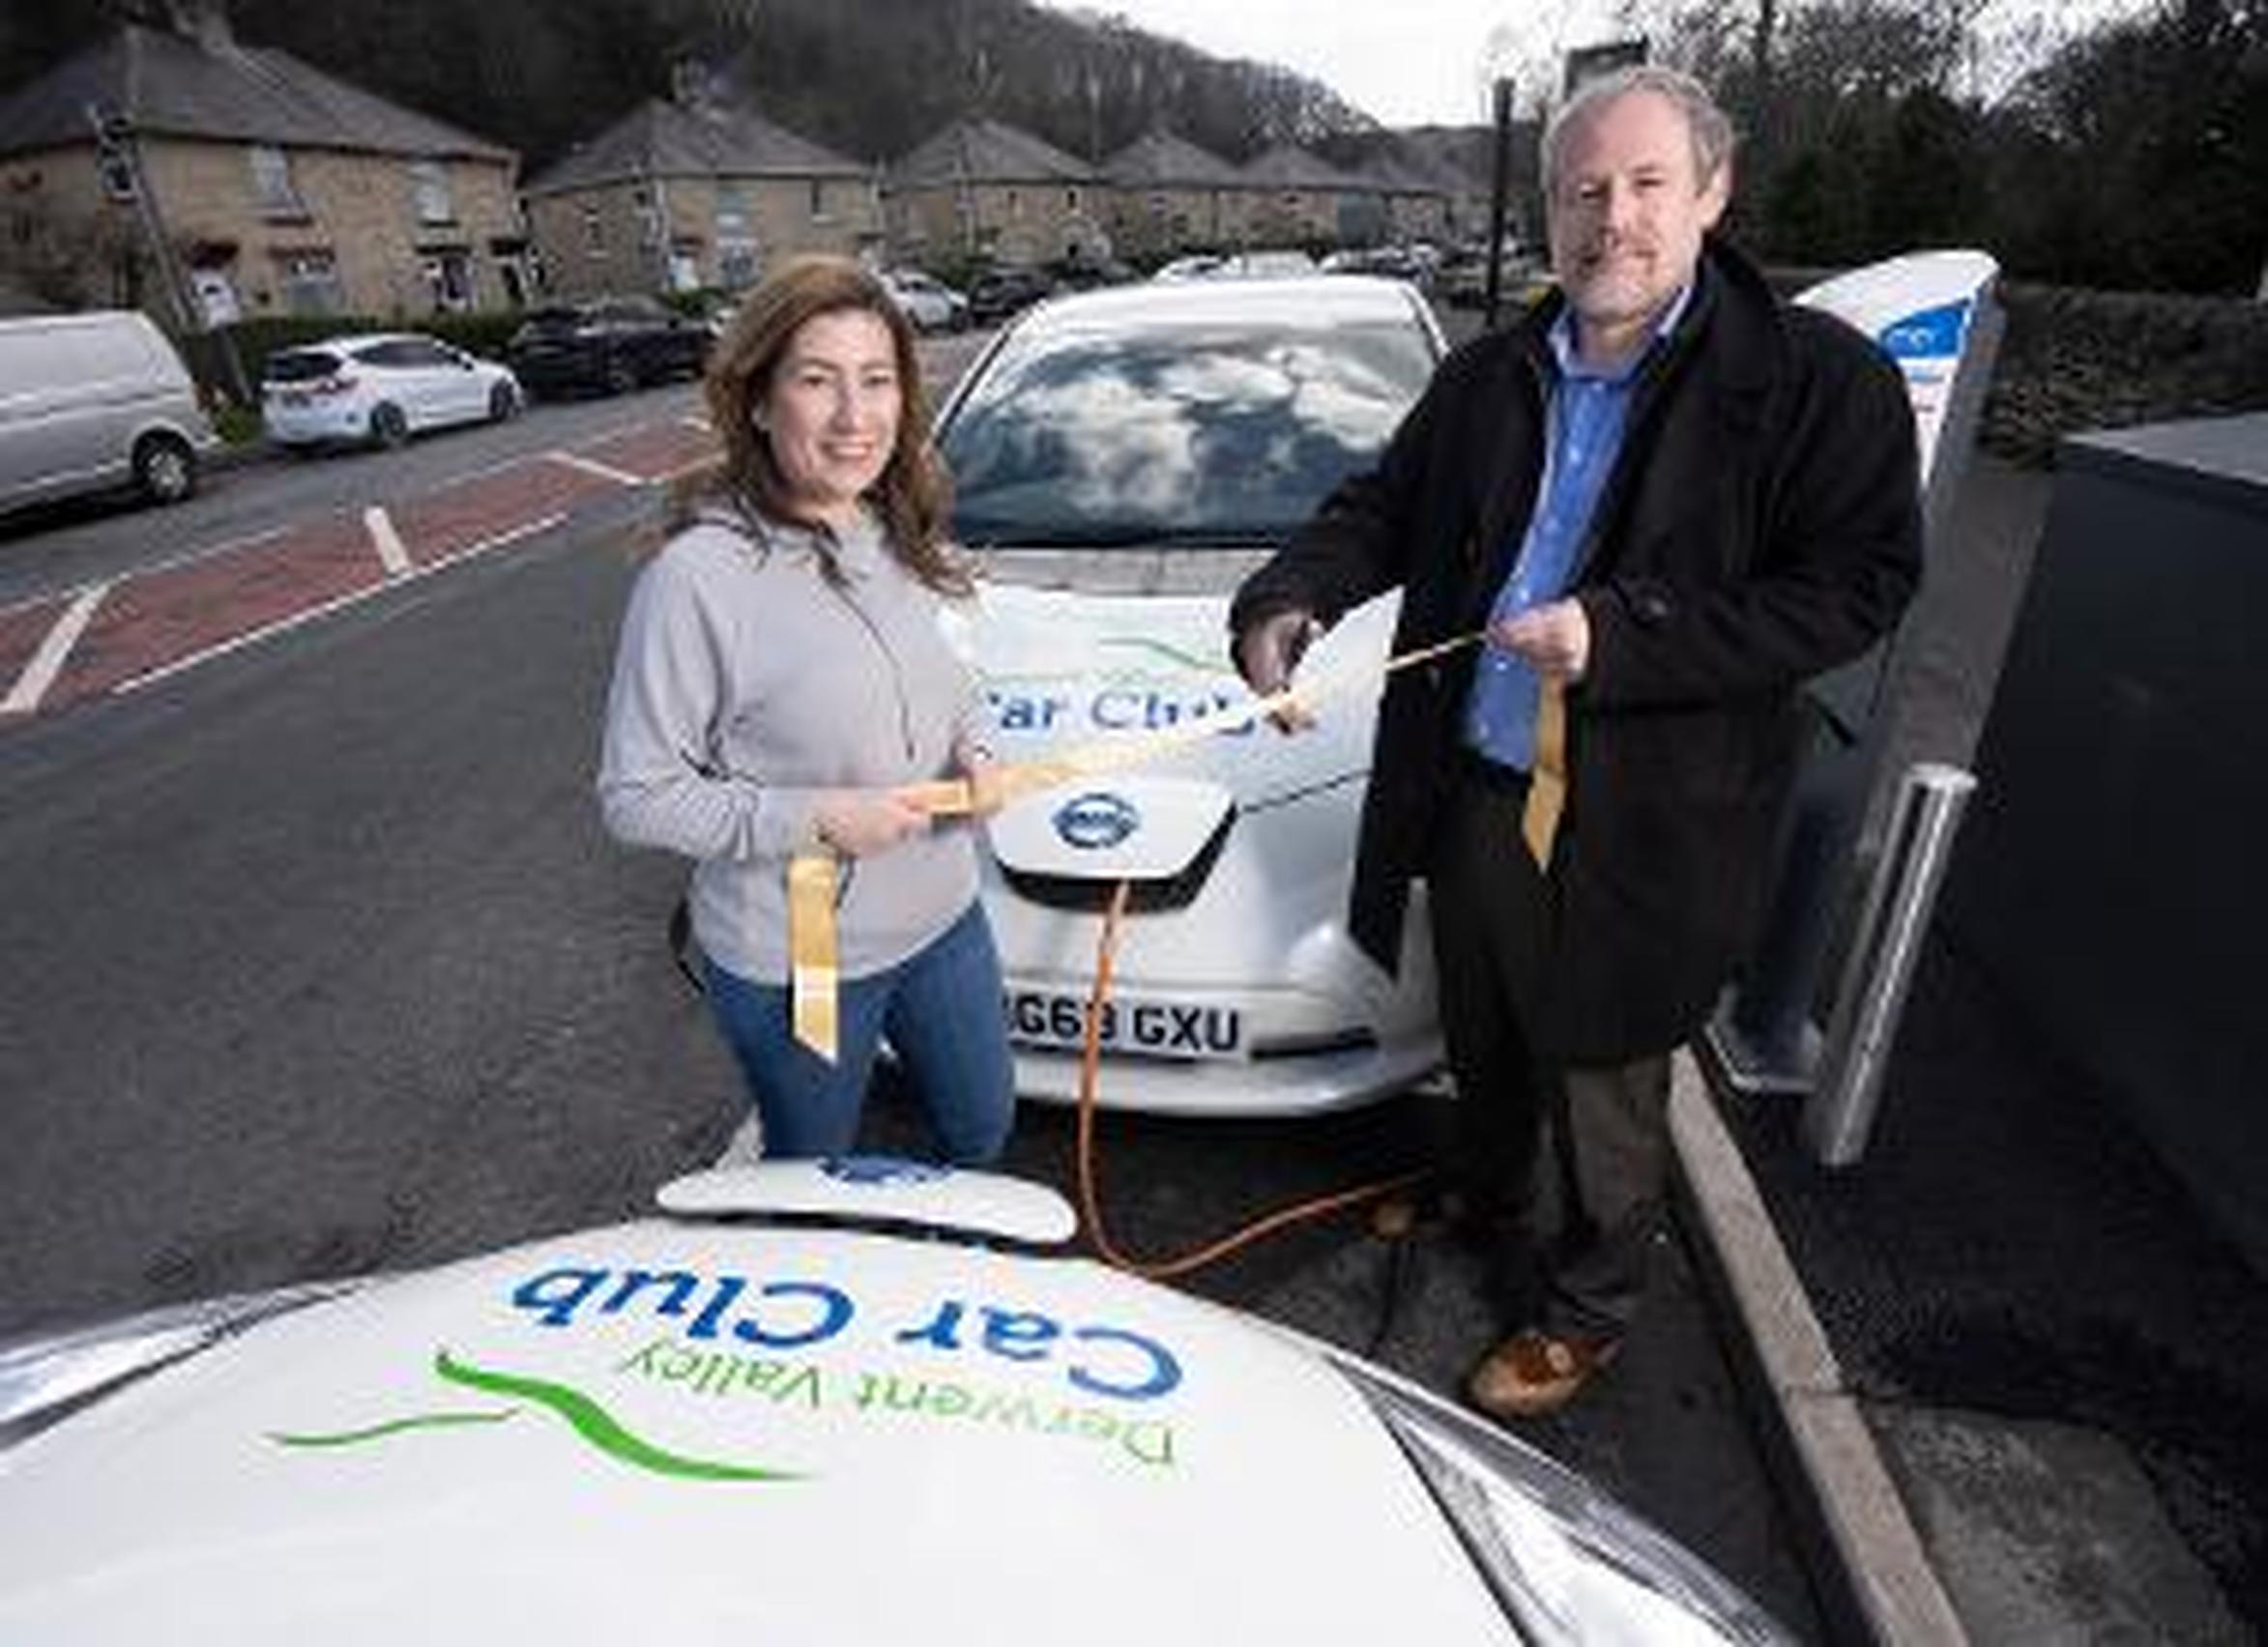 Electric vehicle car hire launches in County Durham